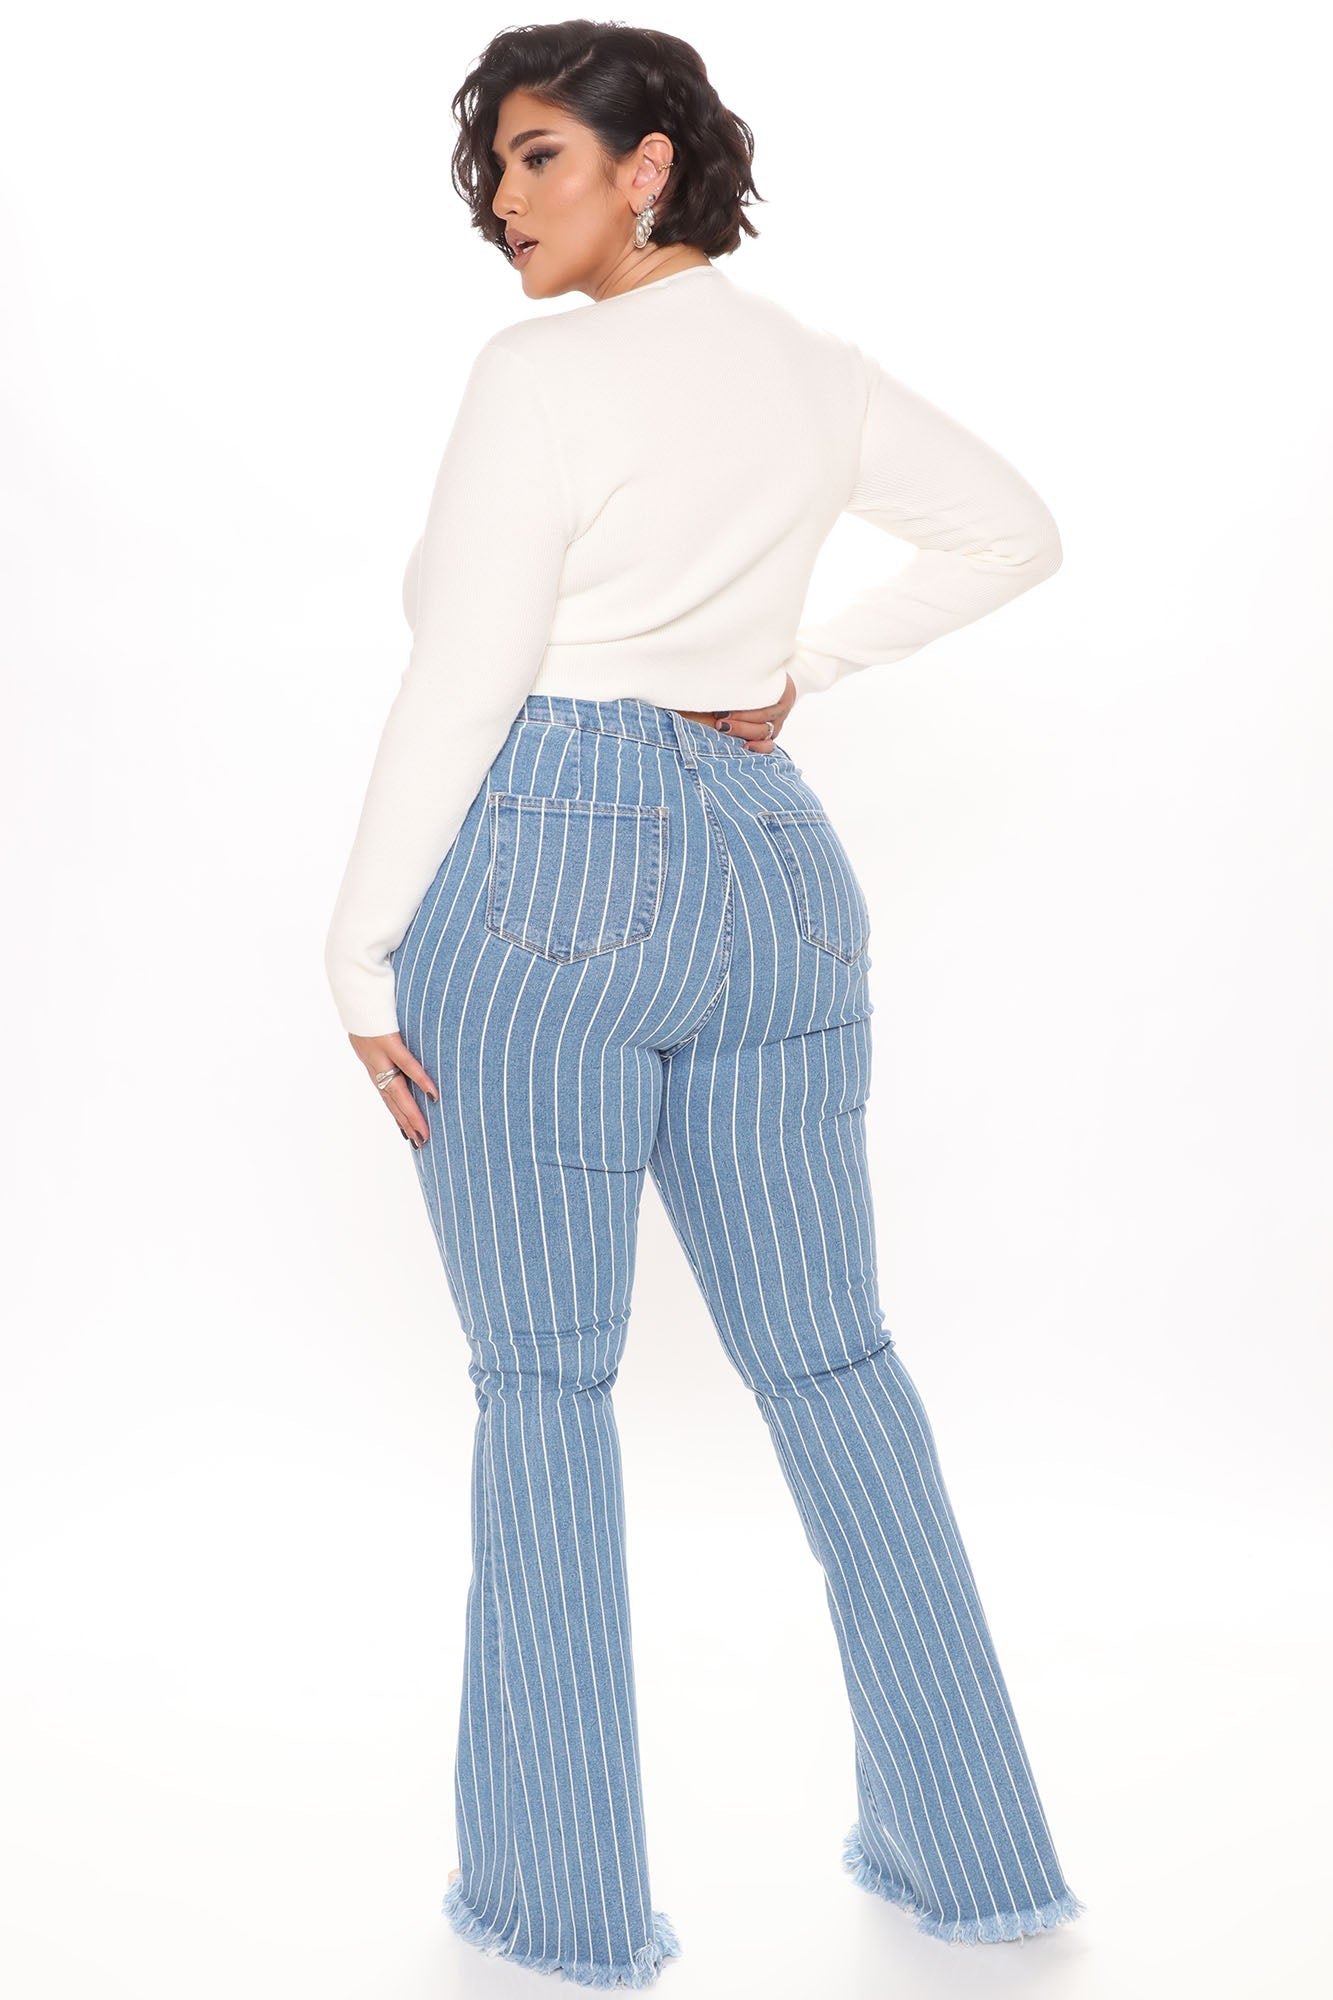 Crossed The Line Striped Flare Jeans - Light Blue Wash Ins Street